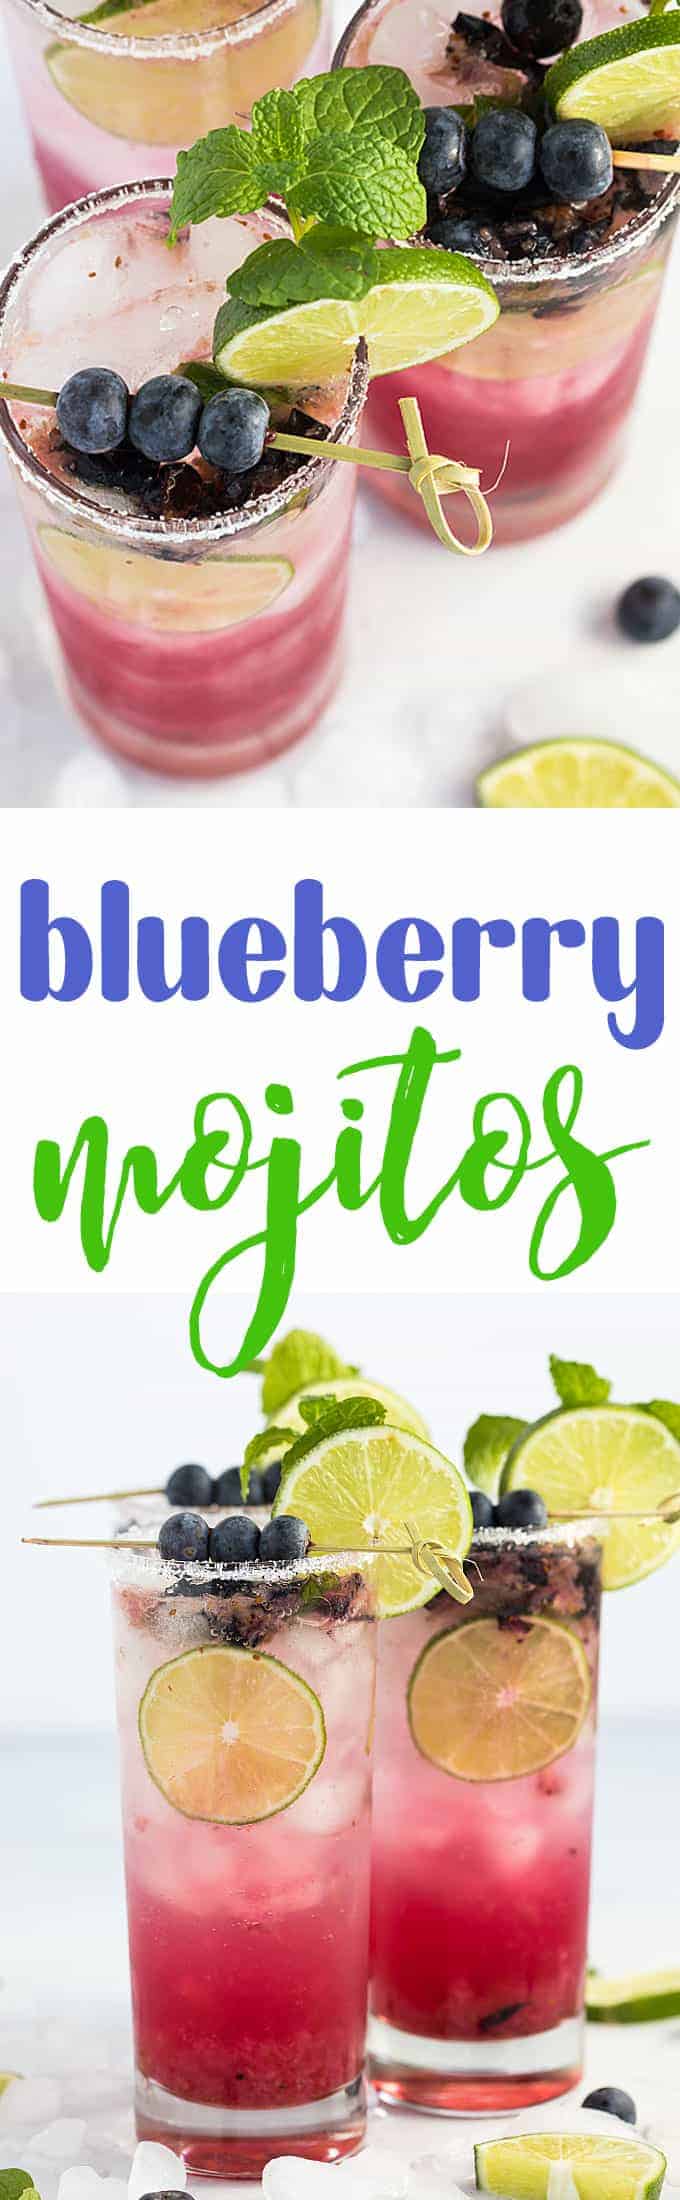 A two image vertical collage of blueberry mojitos with overlay text in the center.